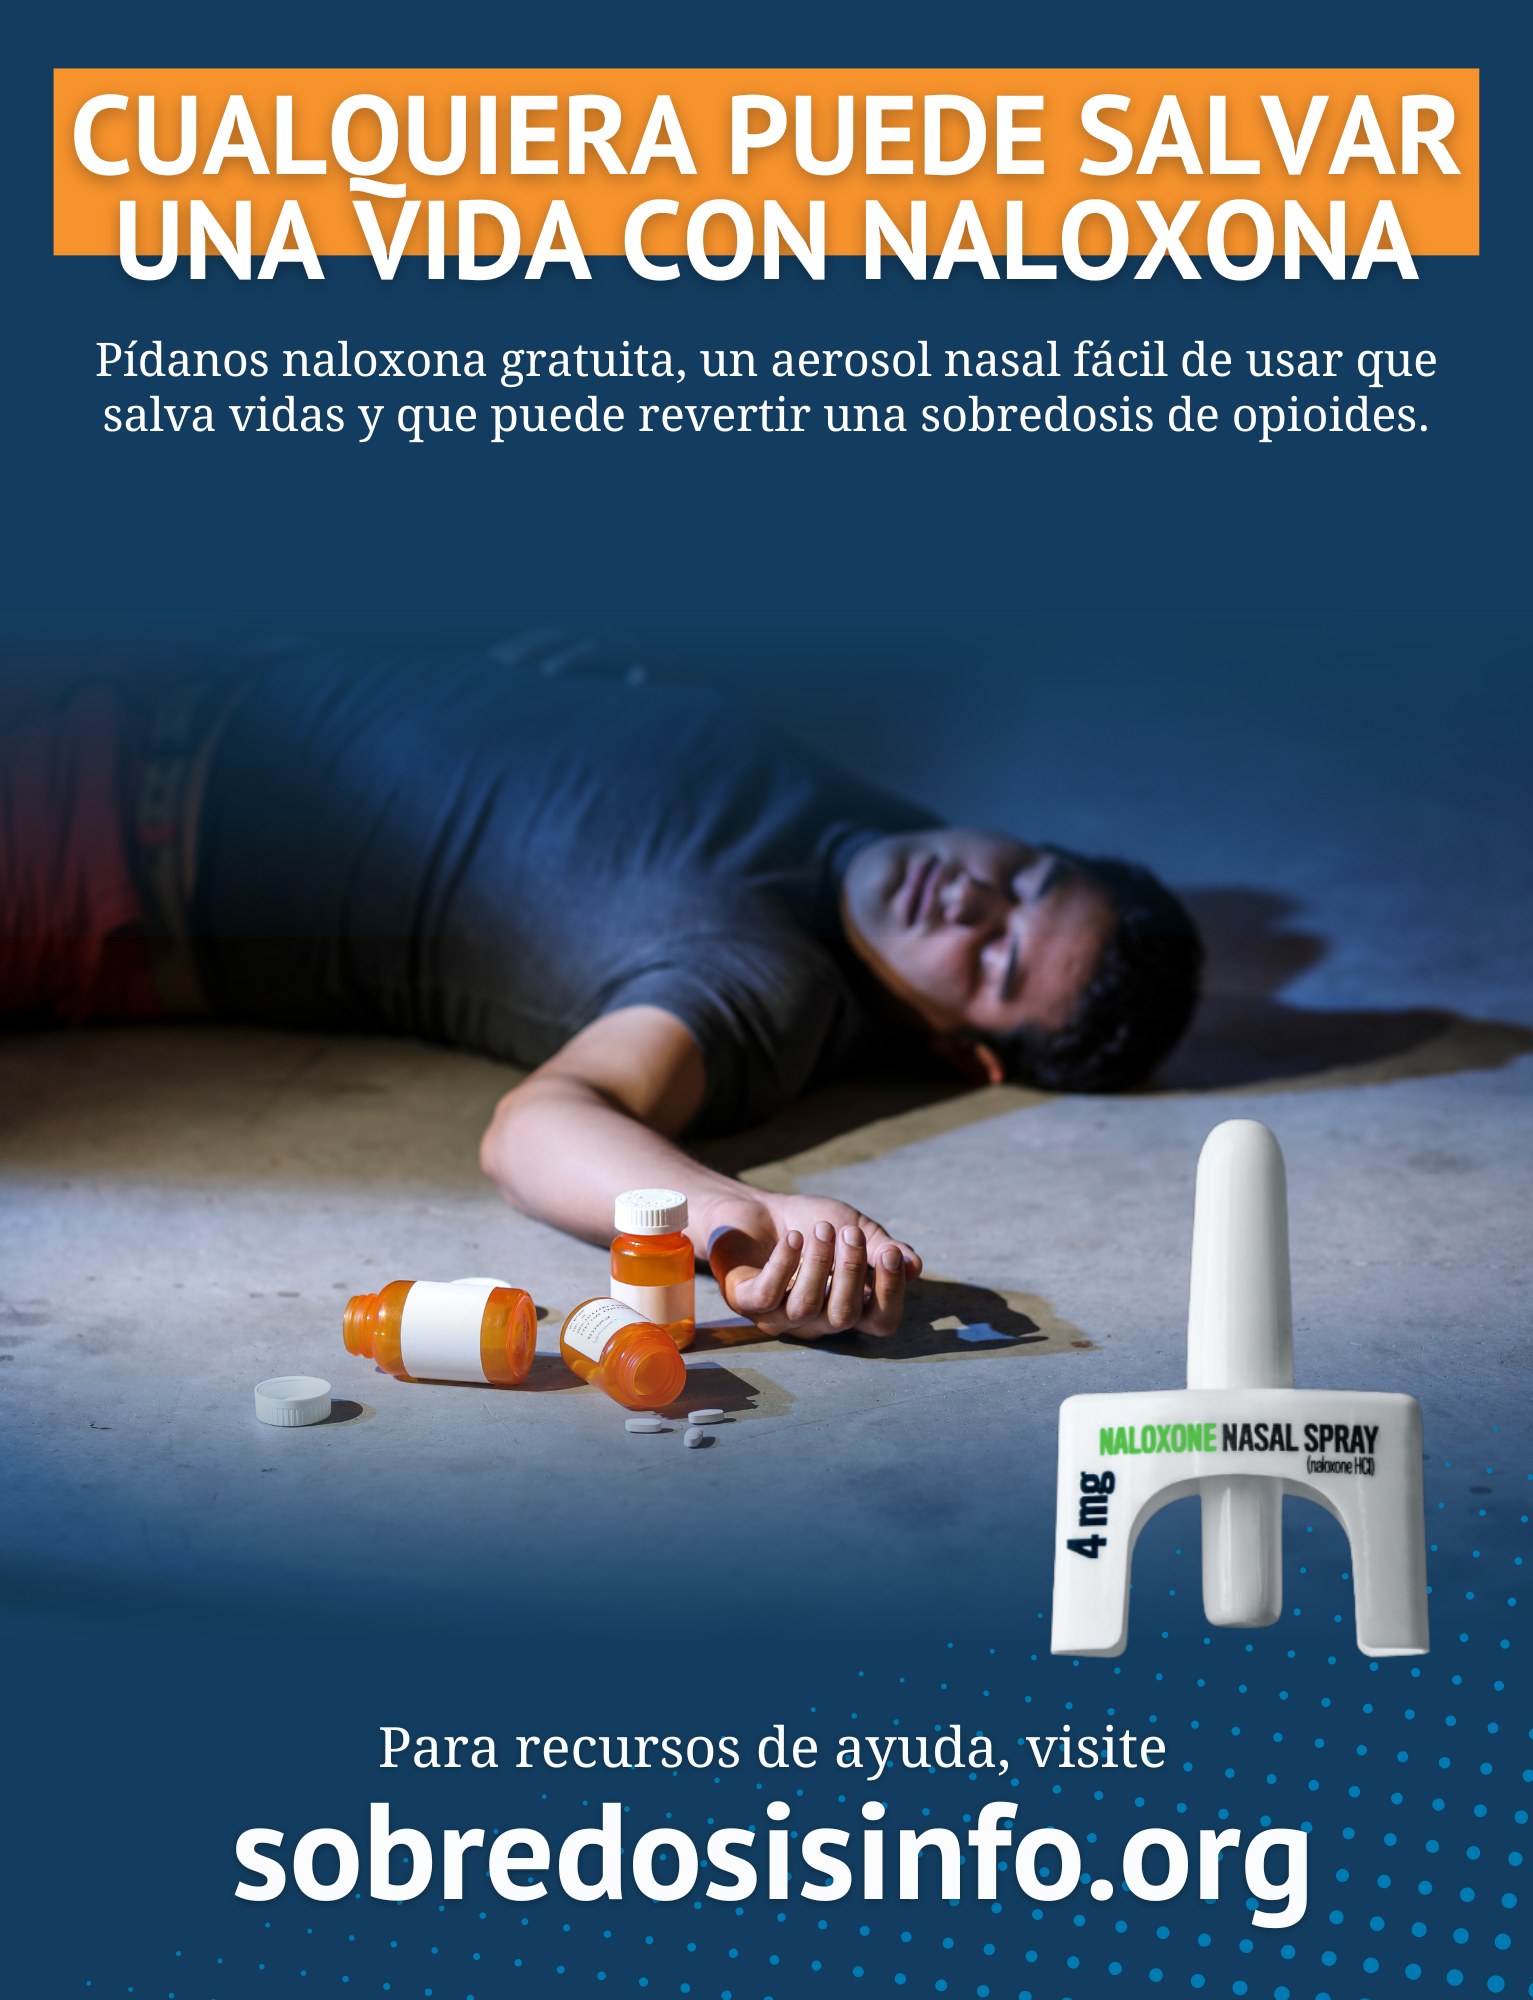 Anyone can save a life with naloxone poster 11.5 x 15 (6).png